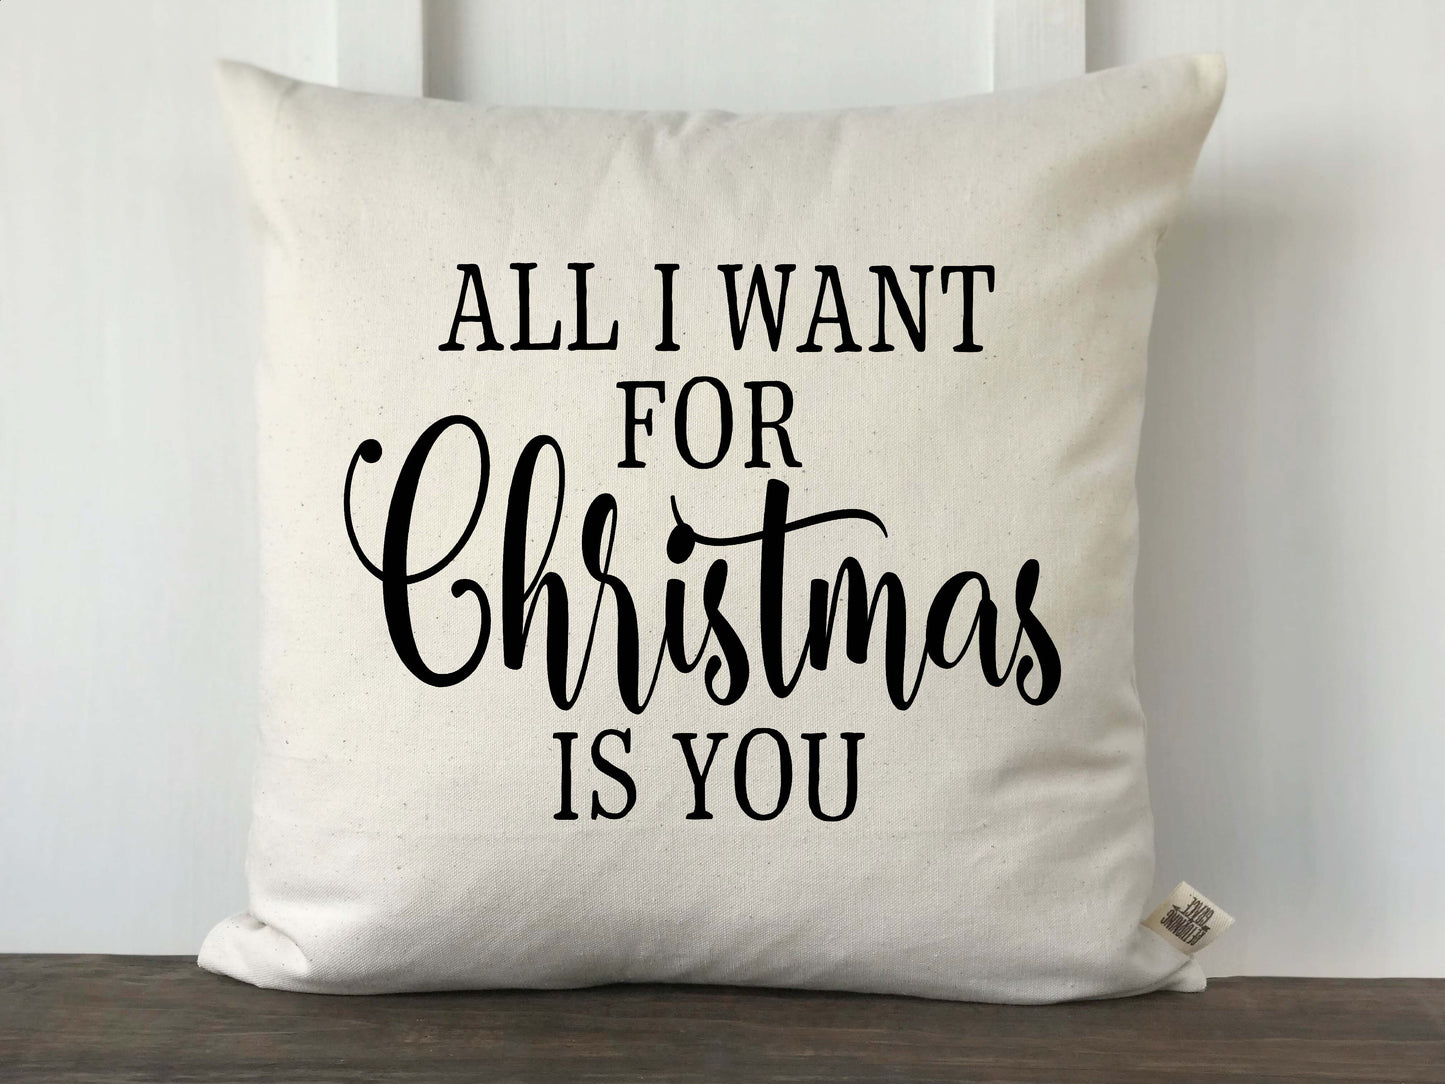 All I want for Christmas is You Pillow Cover